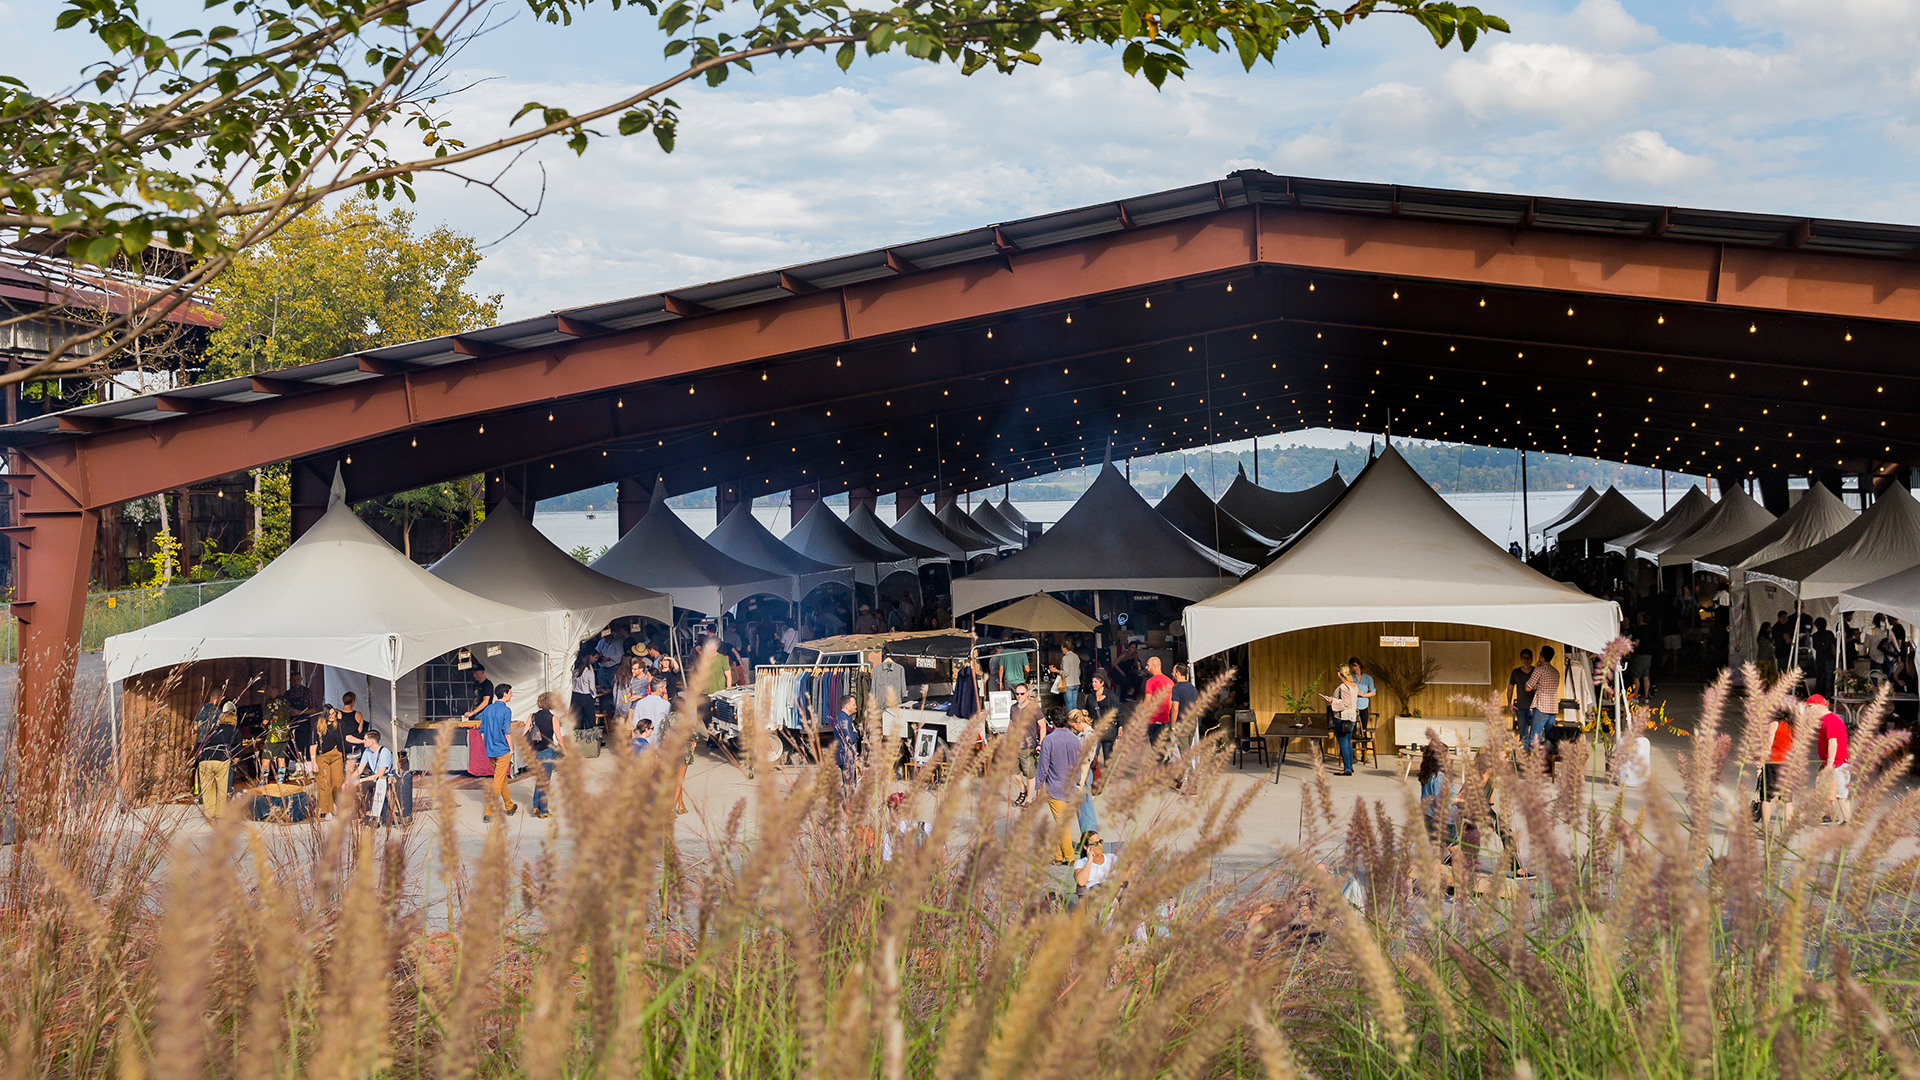 a craft market is held under an outdoor shelter, situated in a field.